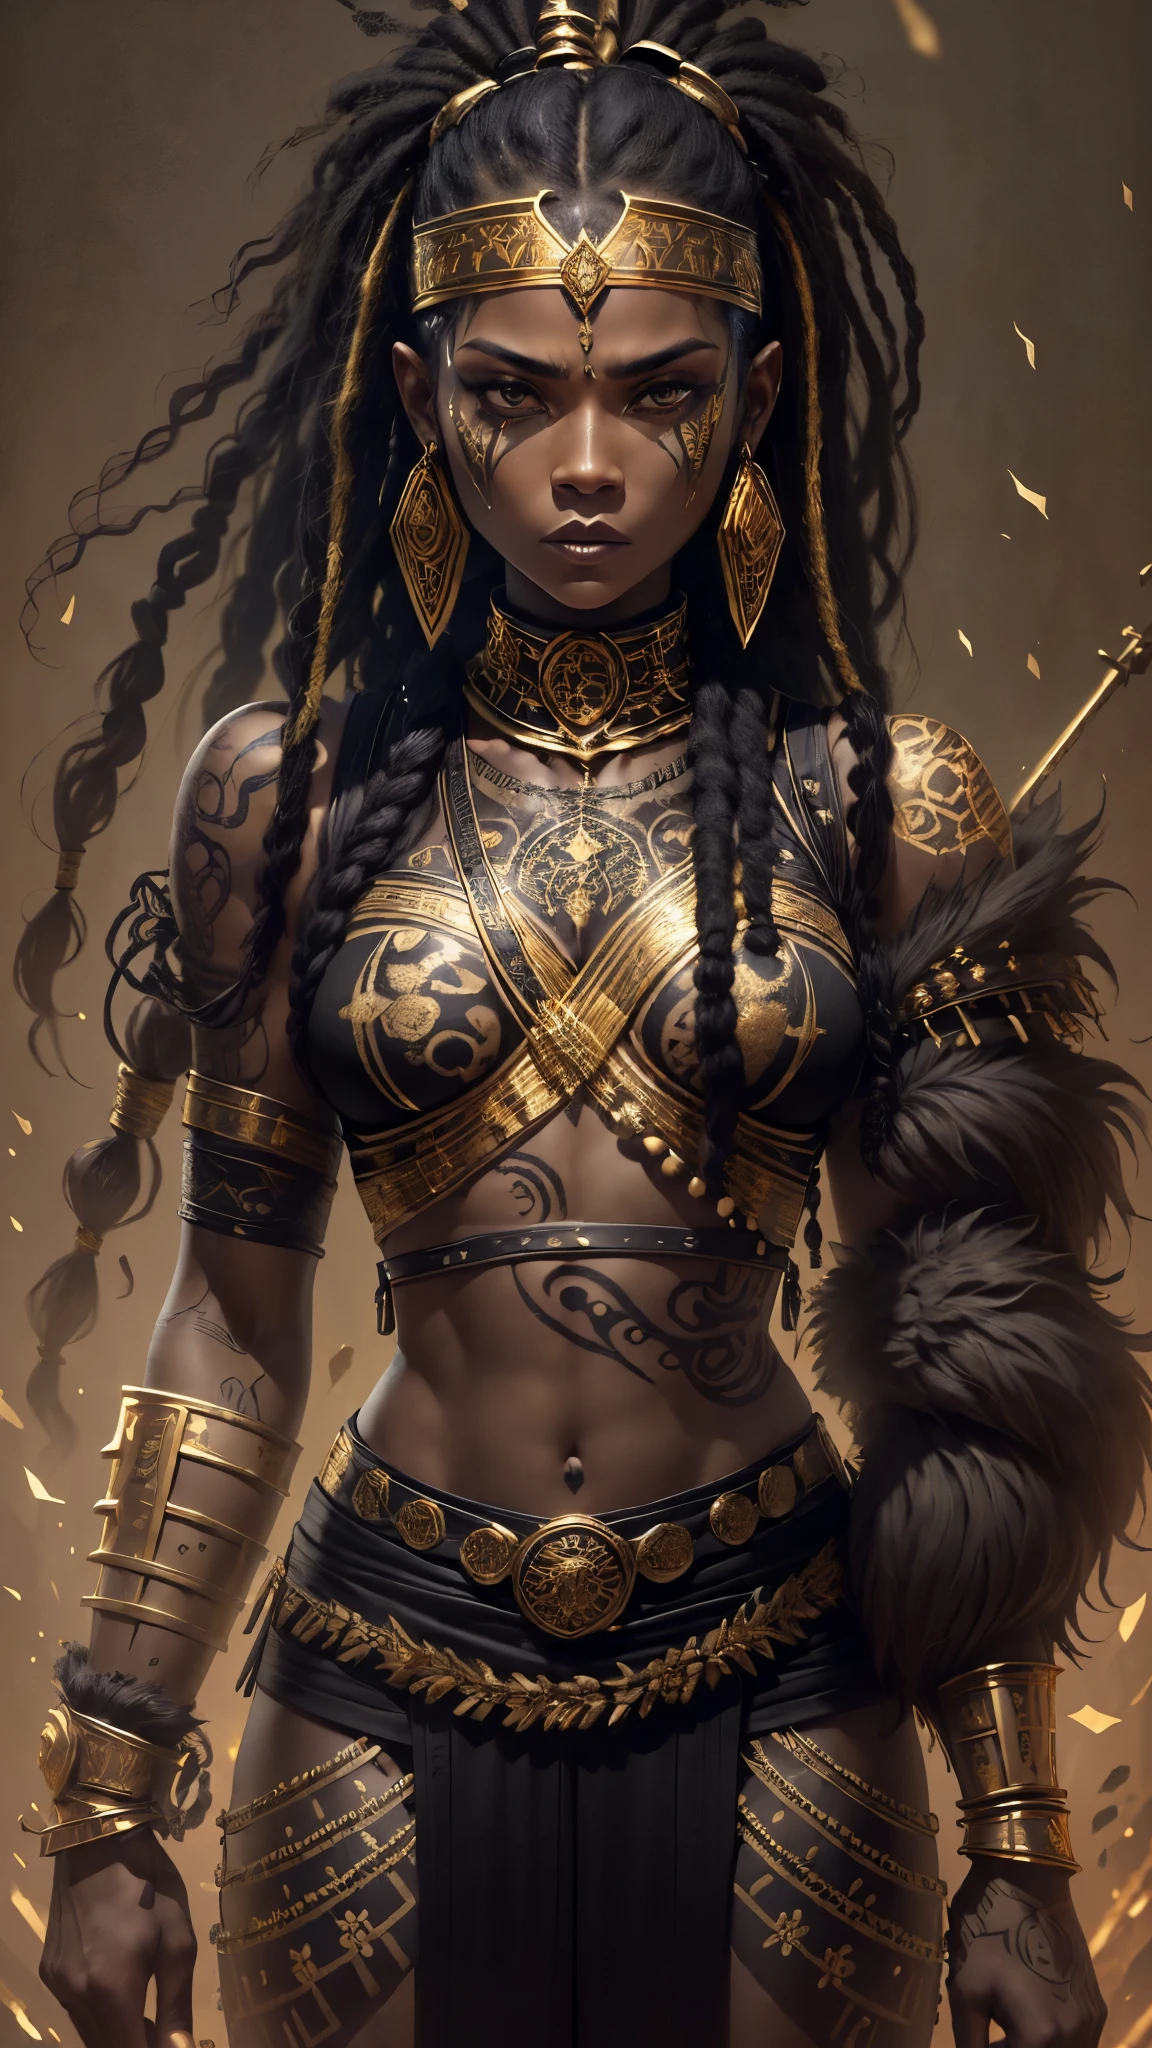 (((full body picture))), (((1 woman))), Top quality, Intricate details , A ebony woman, ((standing holding a spear)), (serious look:1.4), (wearing black and golden battle outfit:1.8) with some animal fur details, (long dreadlock hairstyle:1.3), (reflective eyes:1.3), (tribal tattoo:1.5), looking at the viewer, serious face.